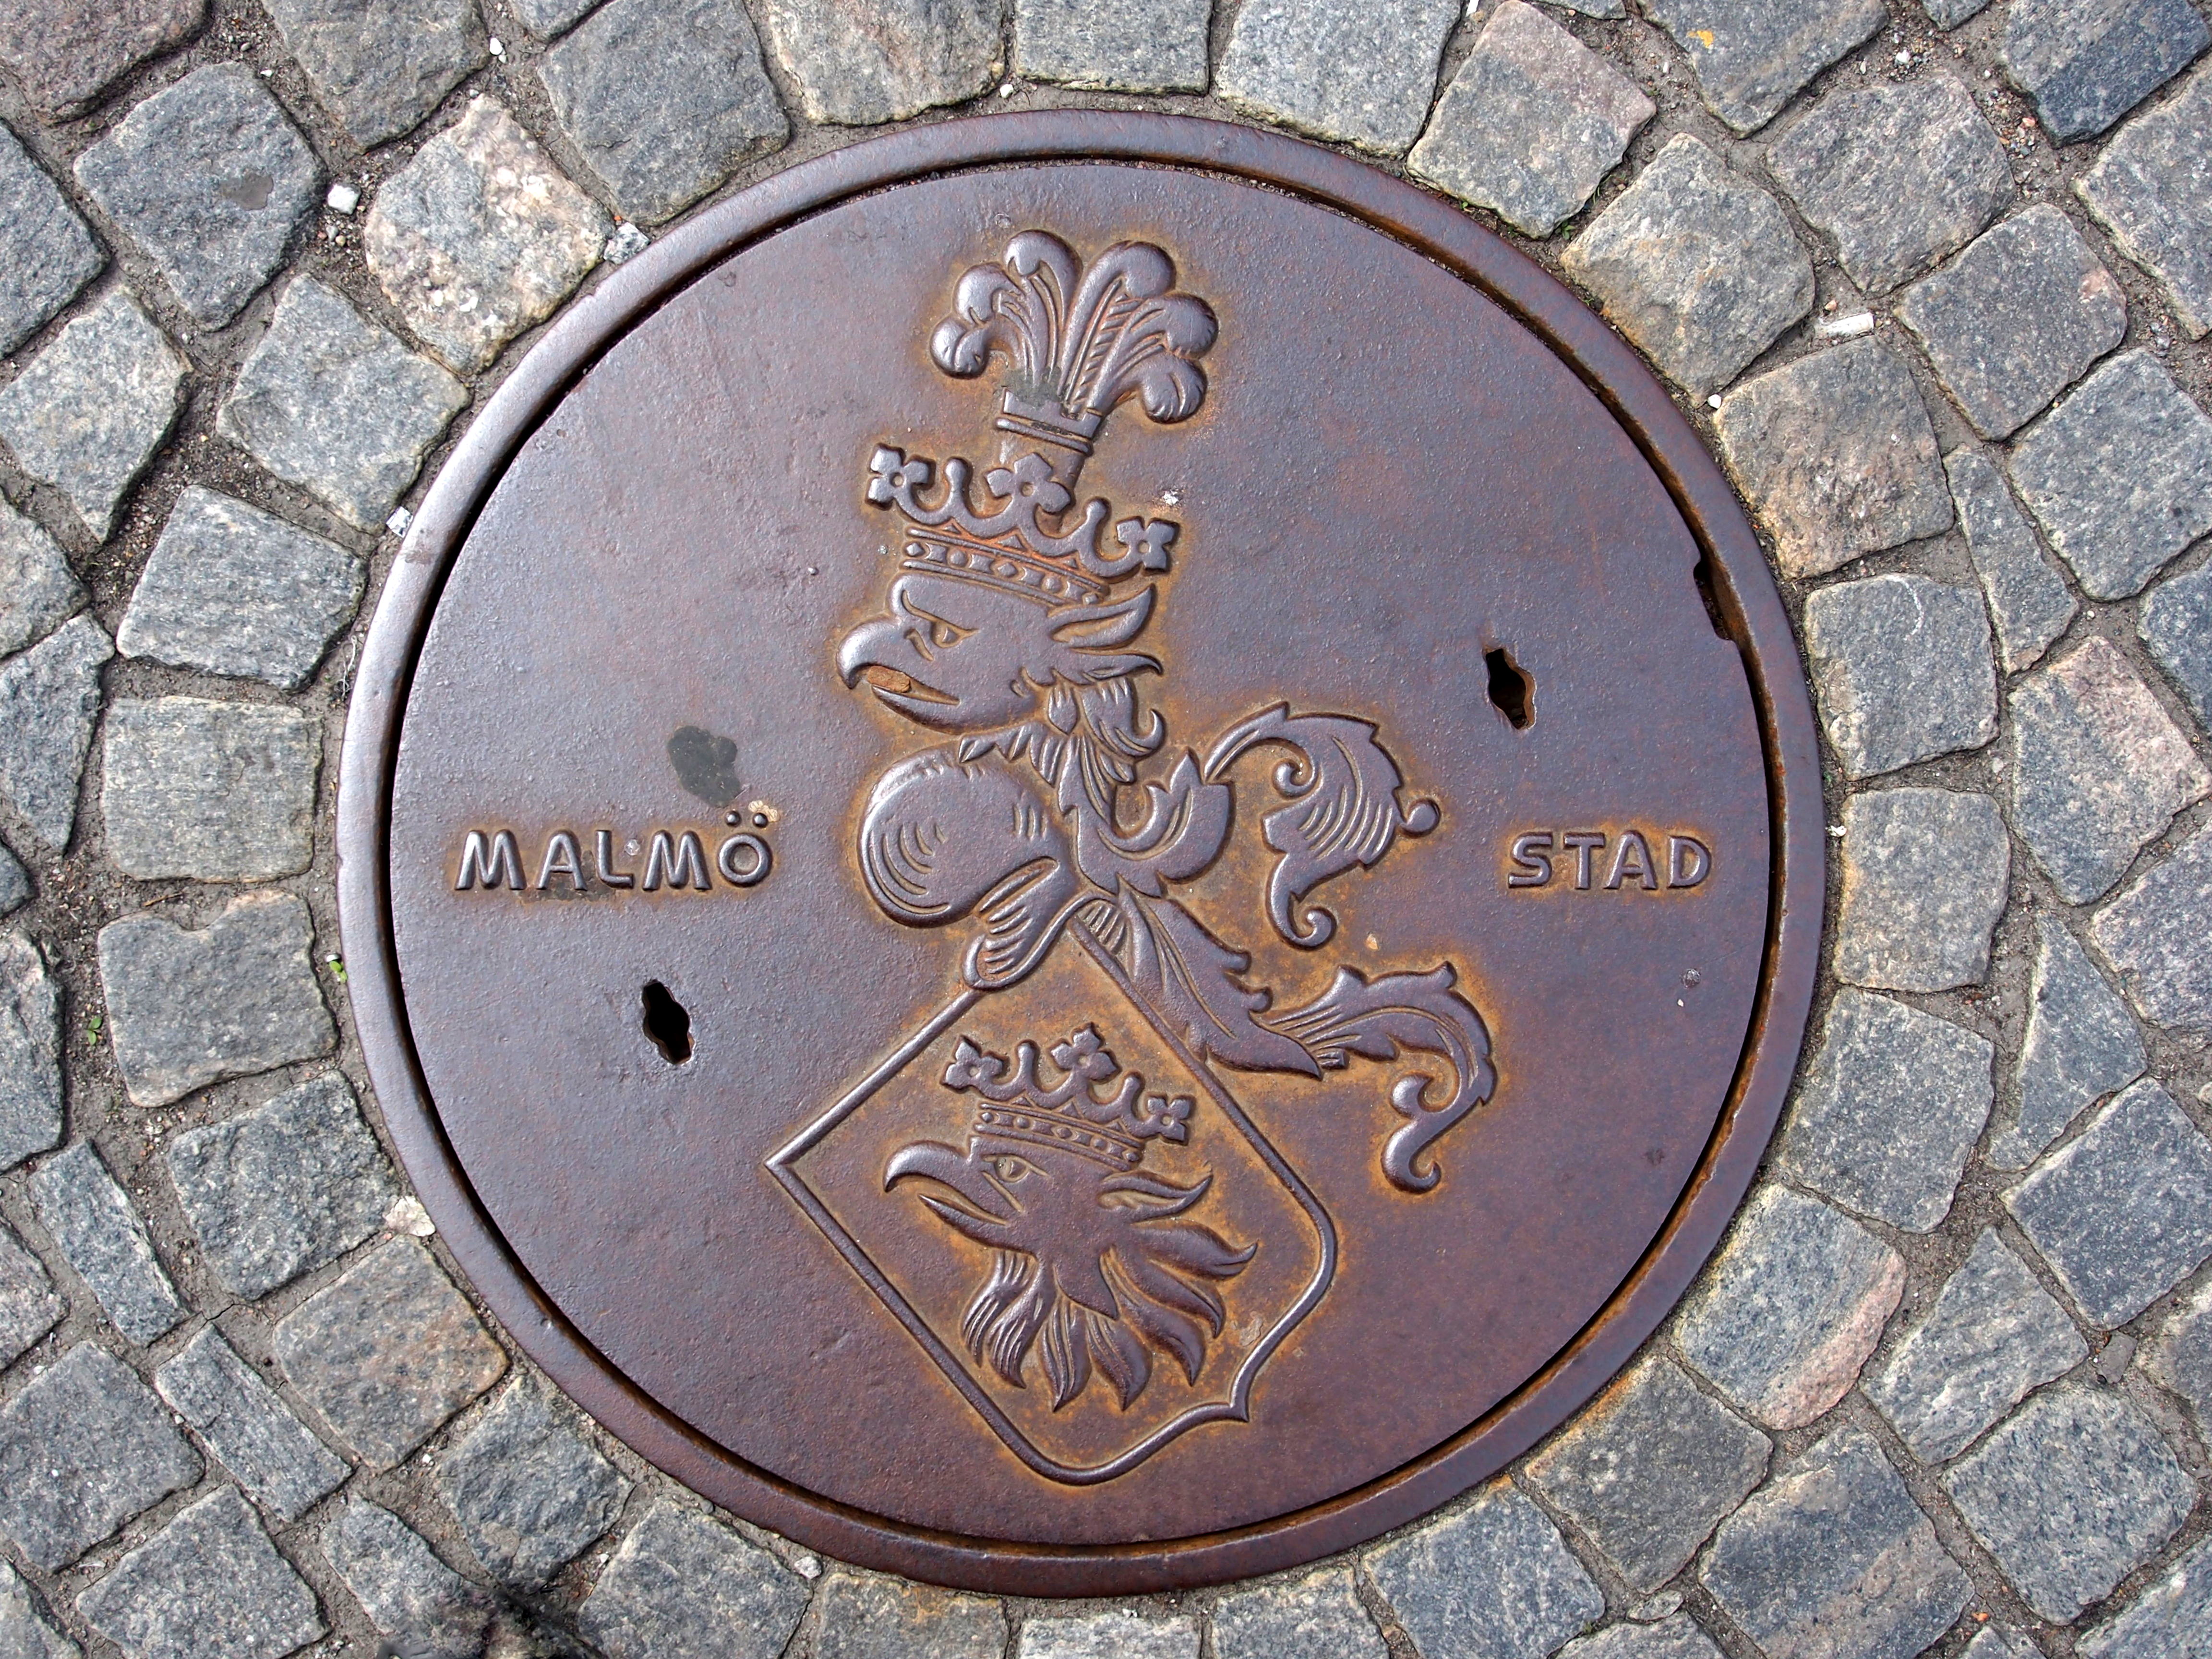 File:Sewer manhole lid in Malmo.JPG - Wikimedia Commons